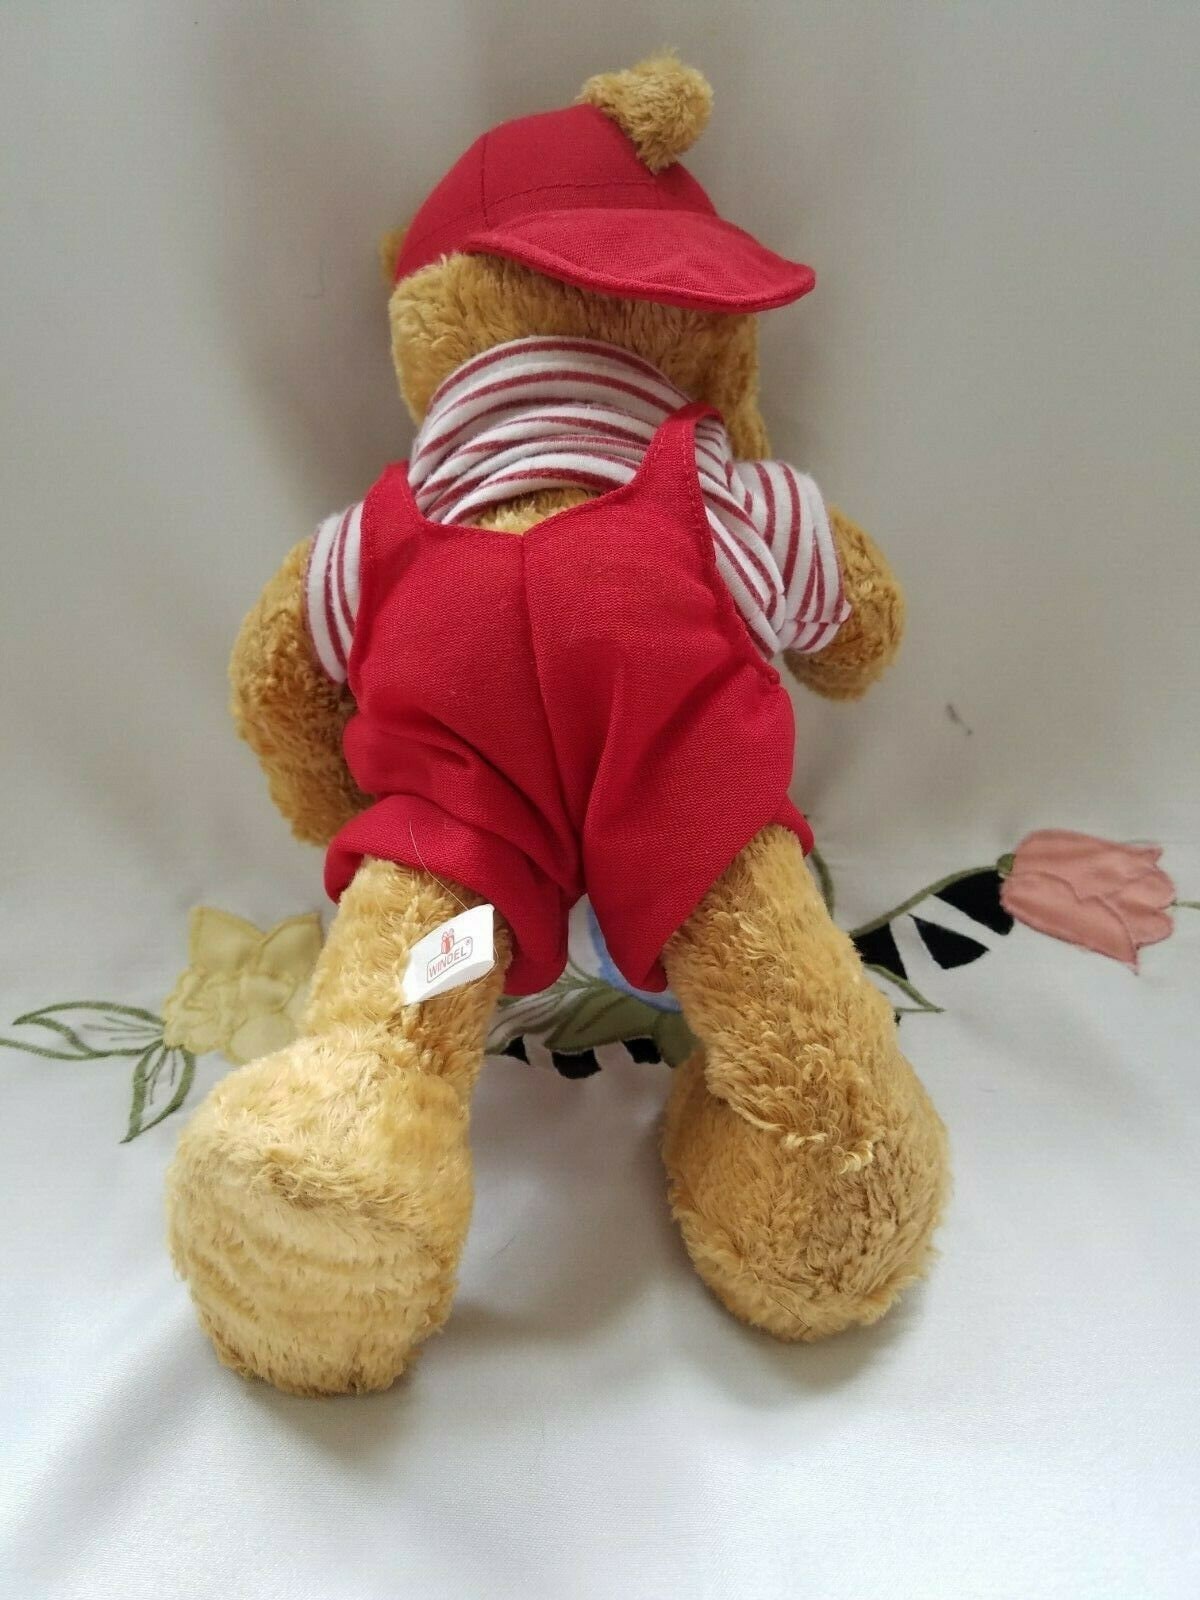 WINDEL BEAR with Red outfit Stuffed Animal Plush 12